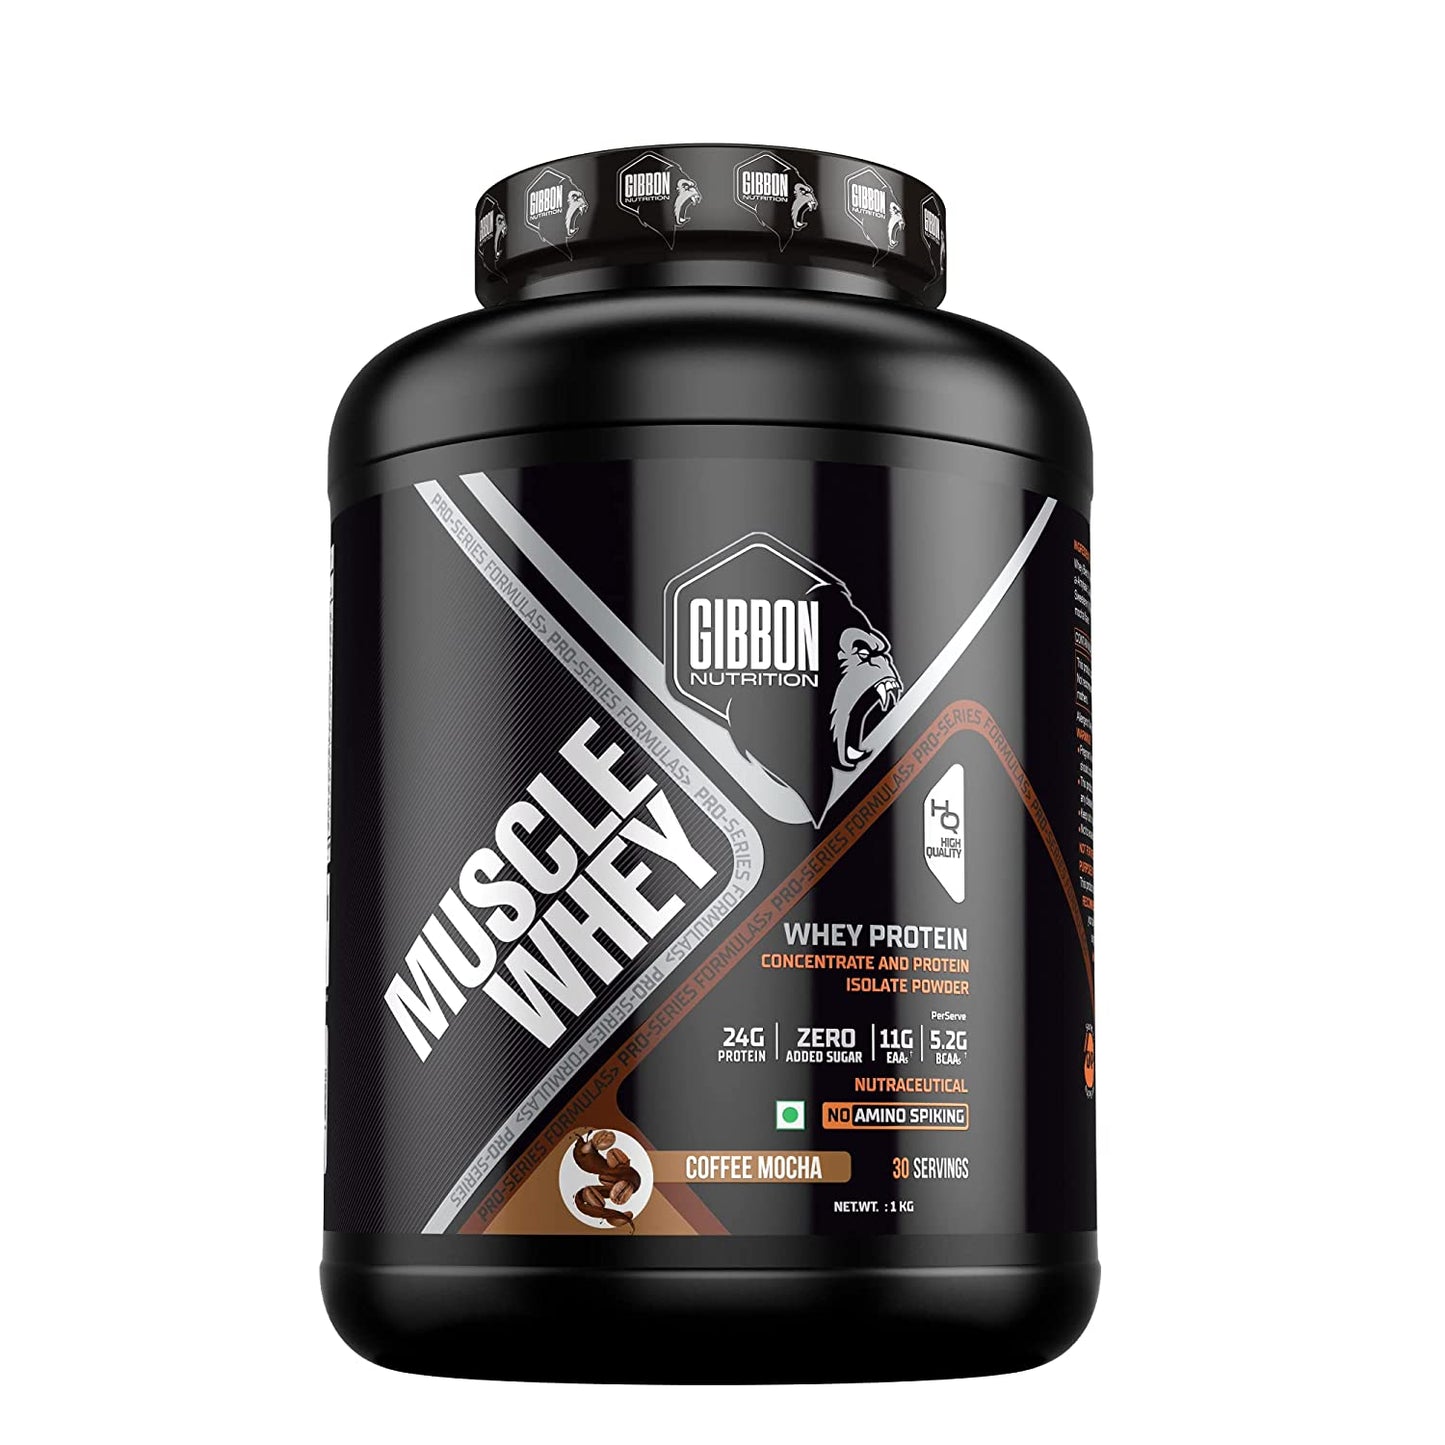 Gibbon Nutrition Muscle Whey Protein Powder 1kg